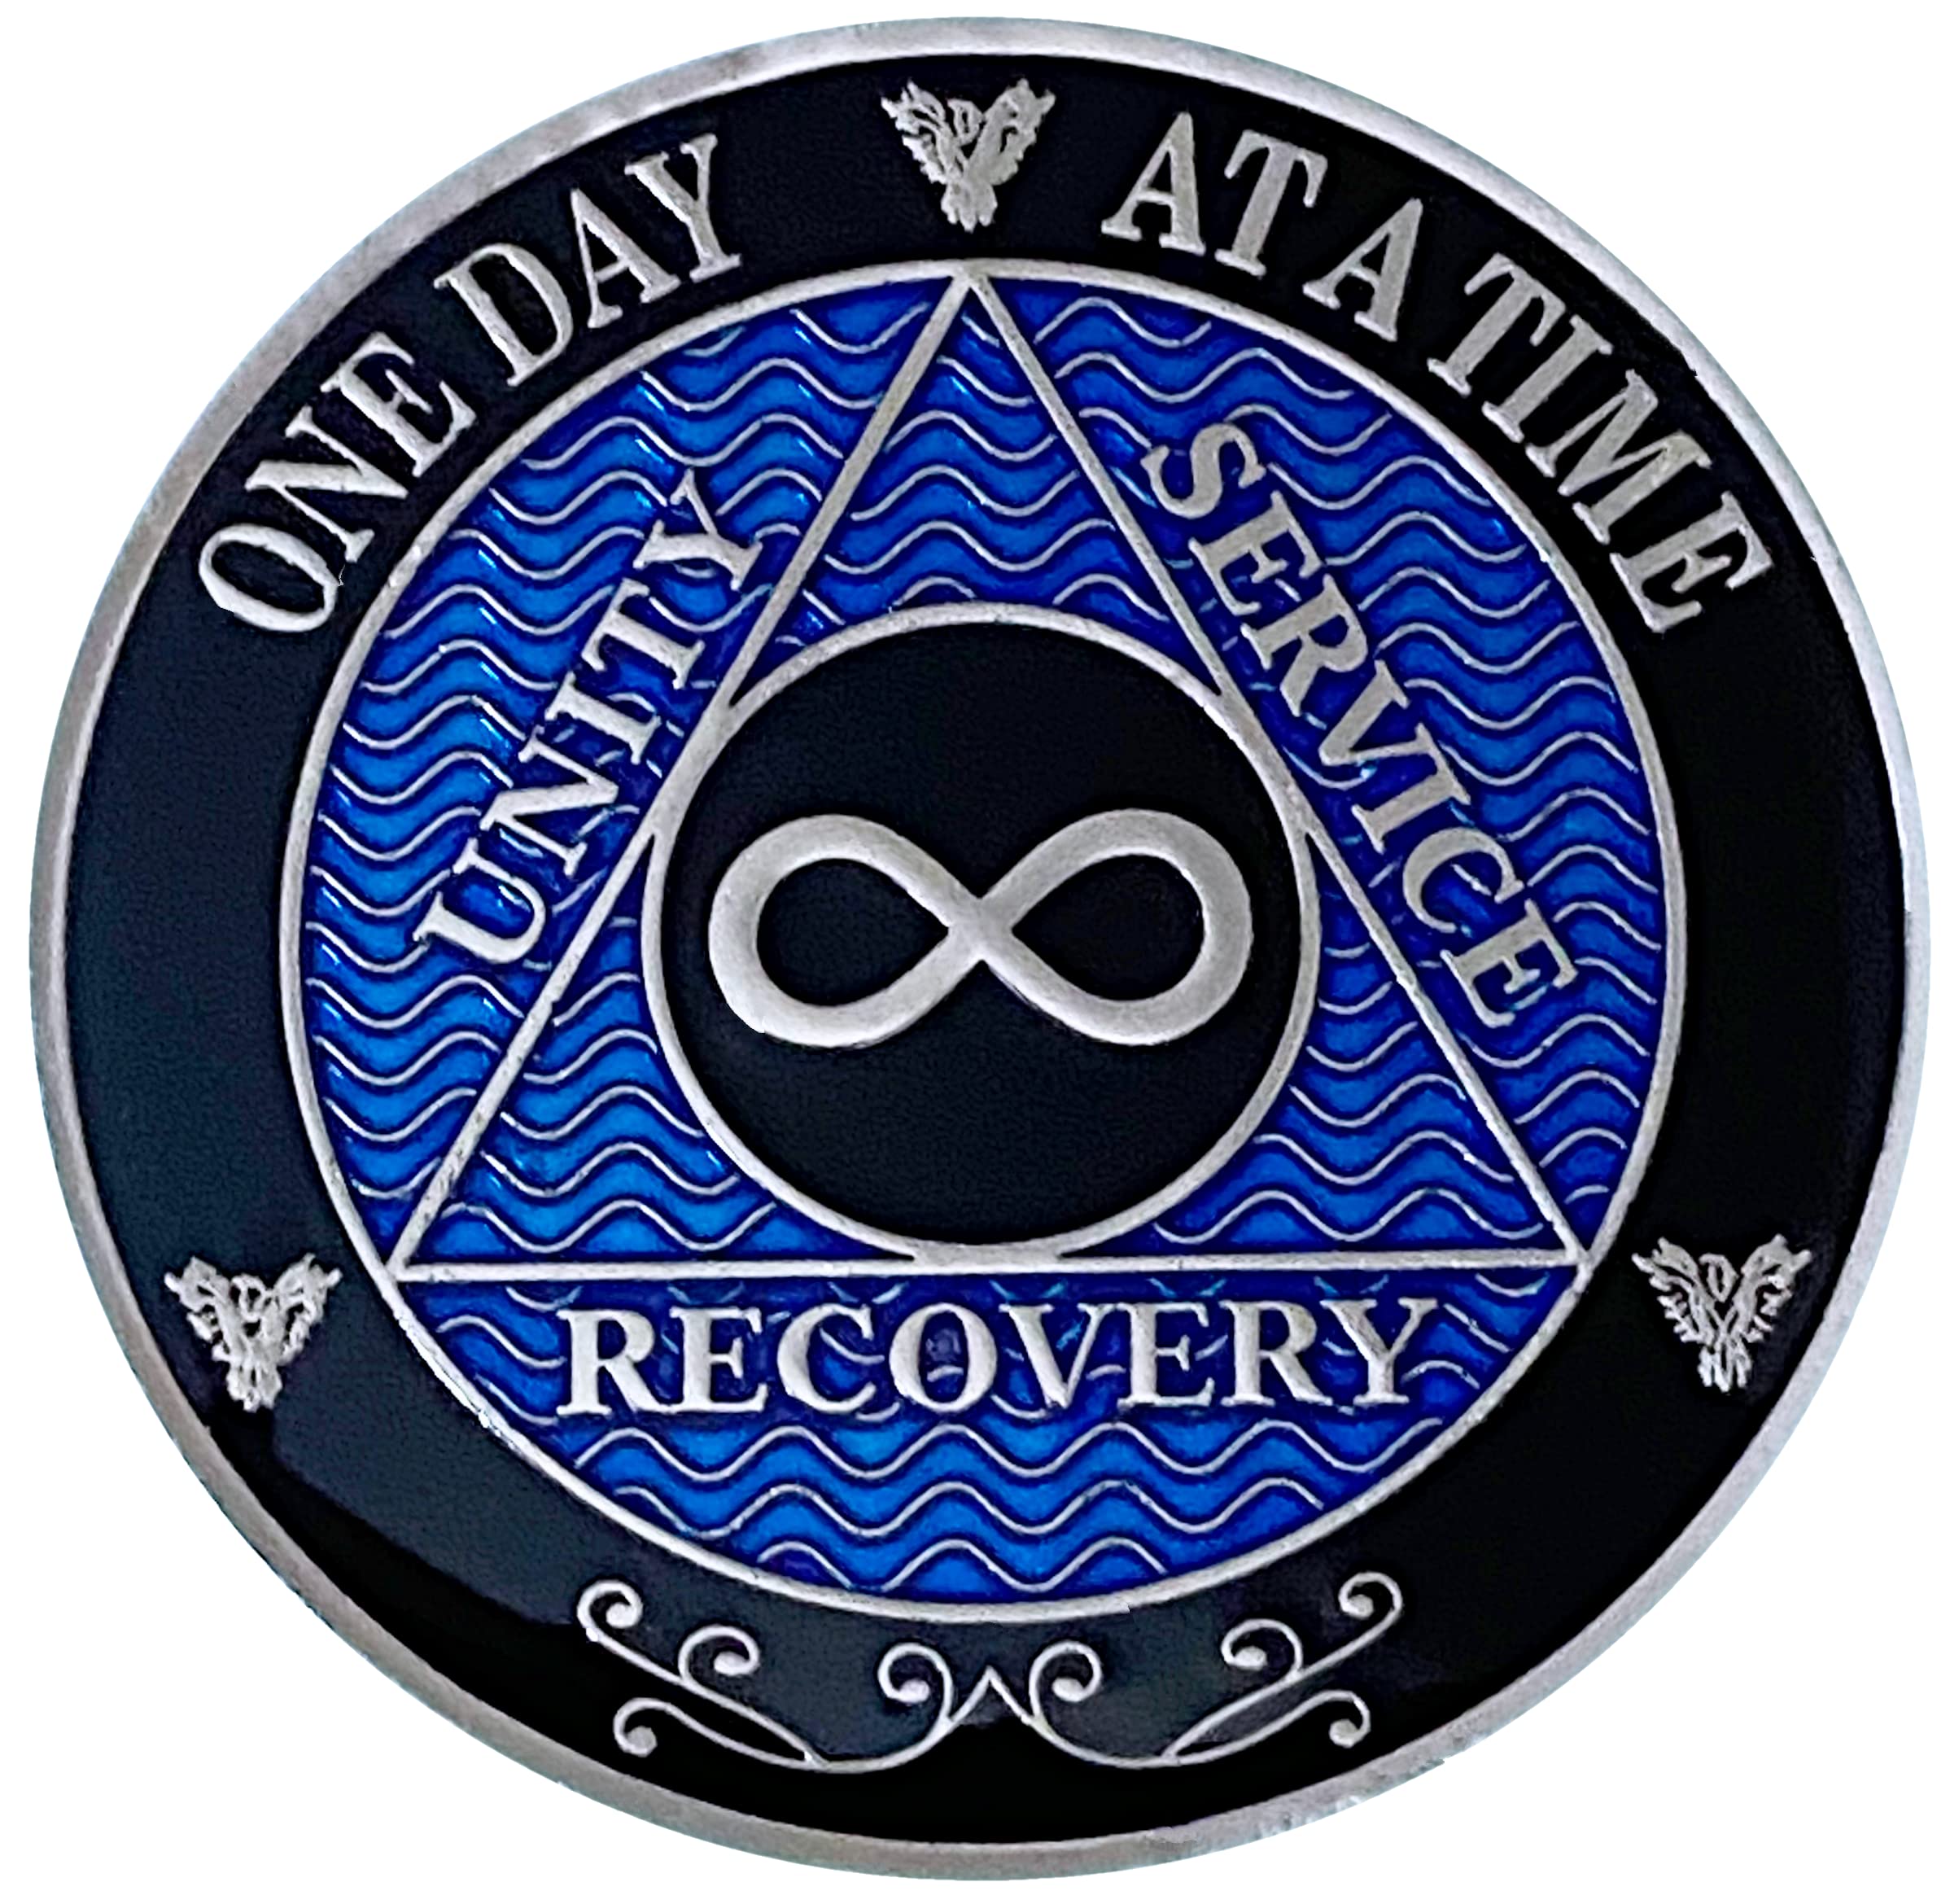 Infinity Eternity AA Medallion Chocolate Bronze Color Sobriety Chip – RecoveryChip